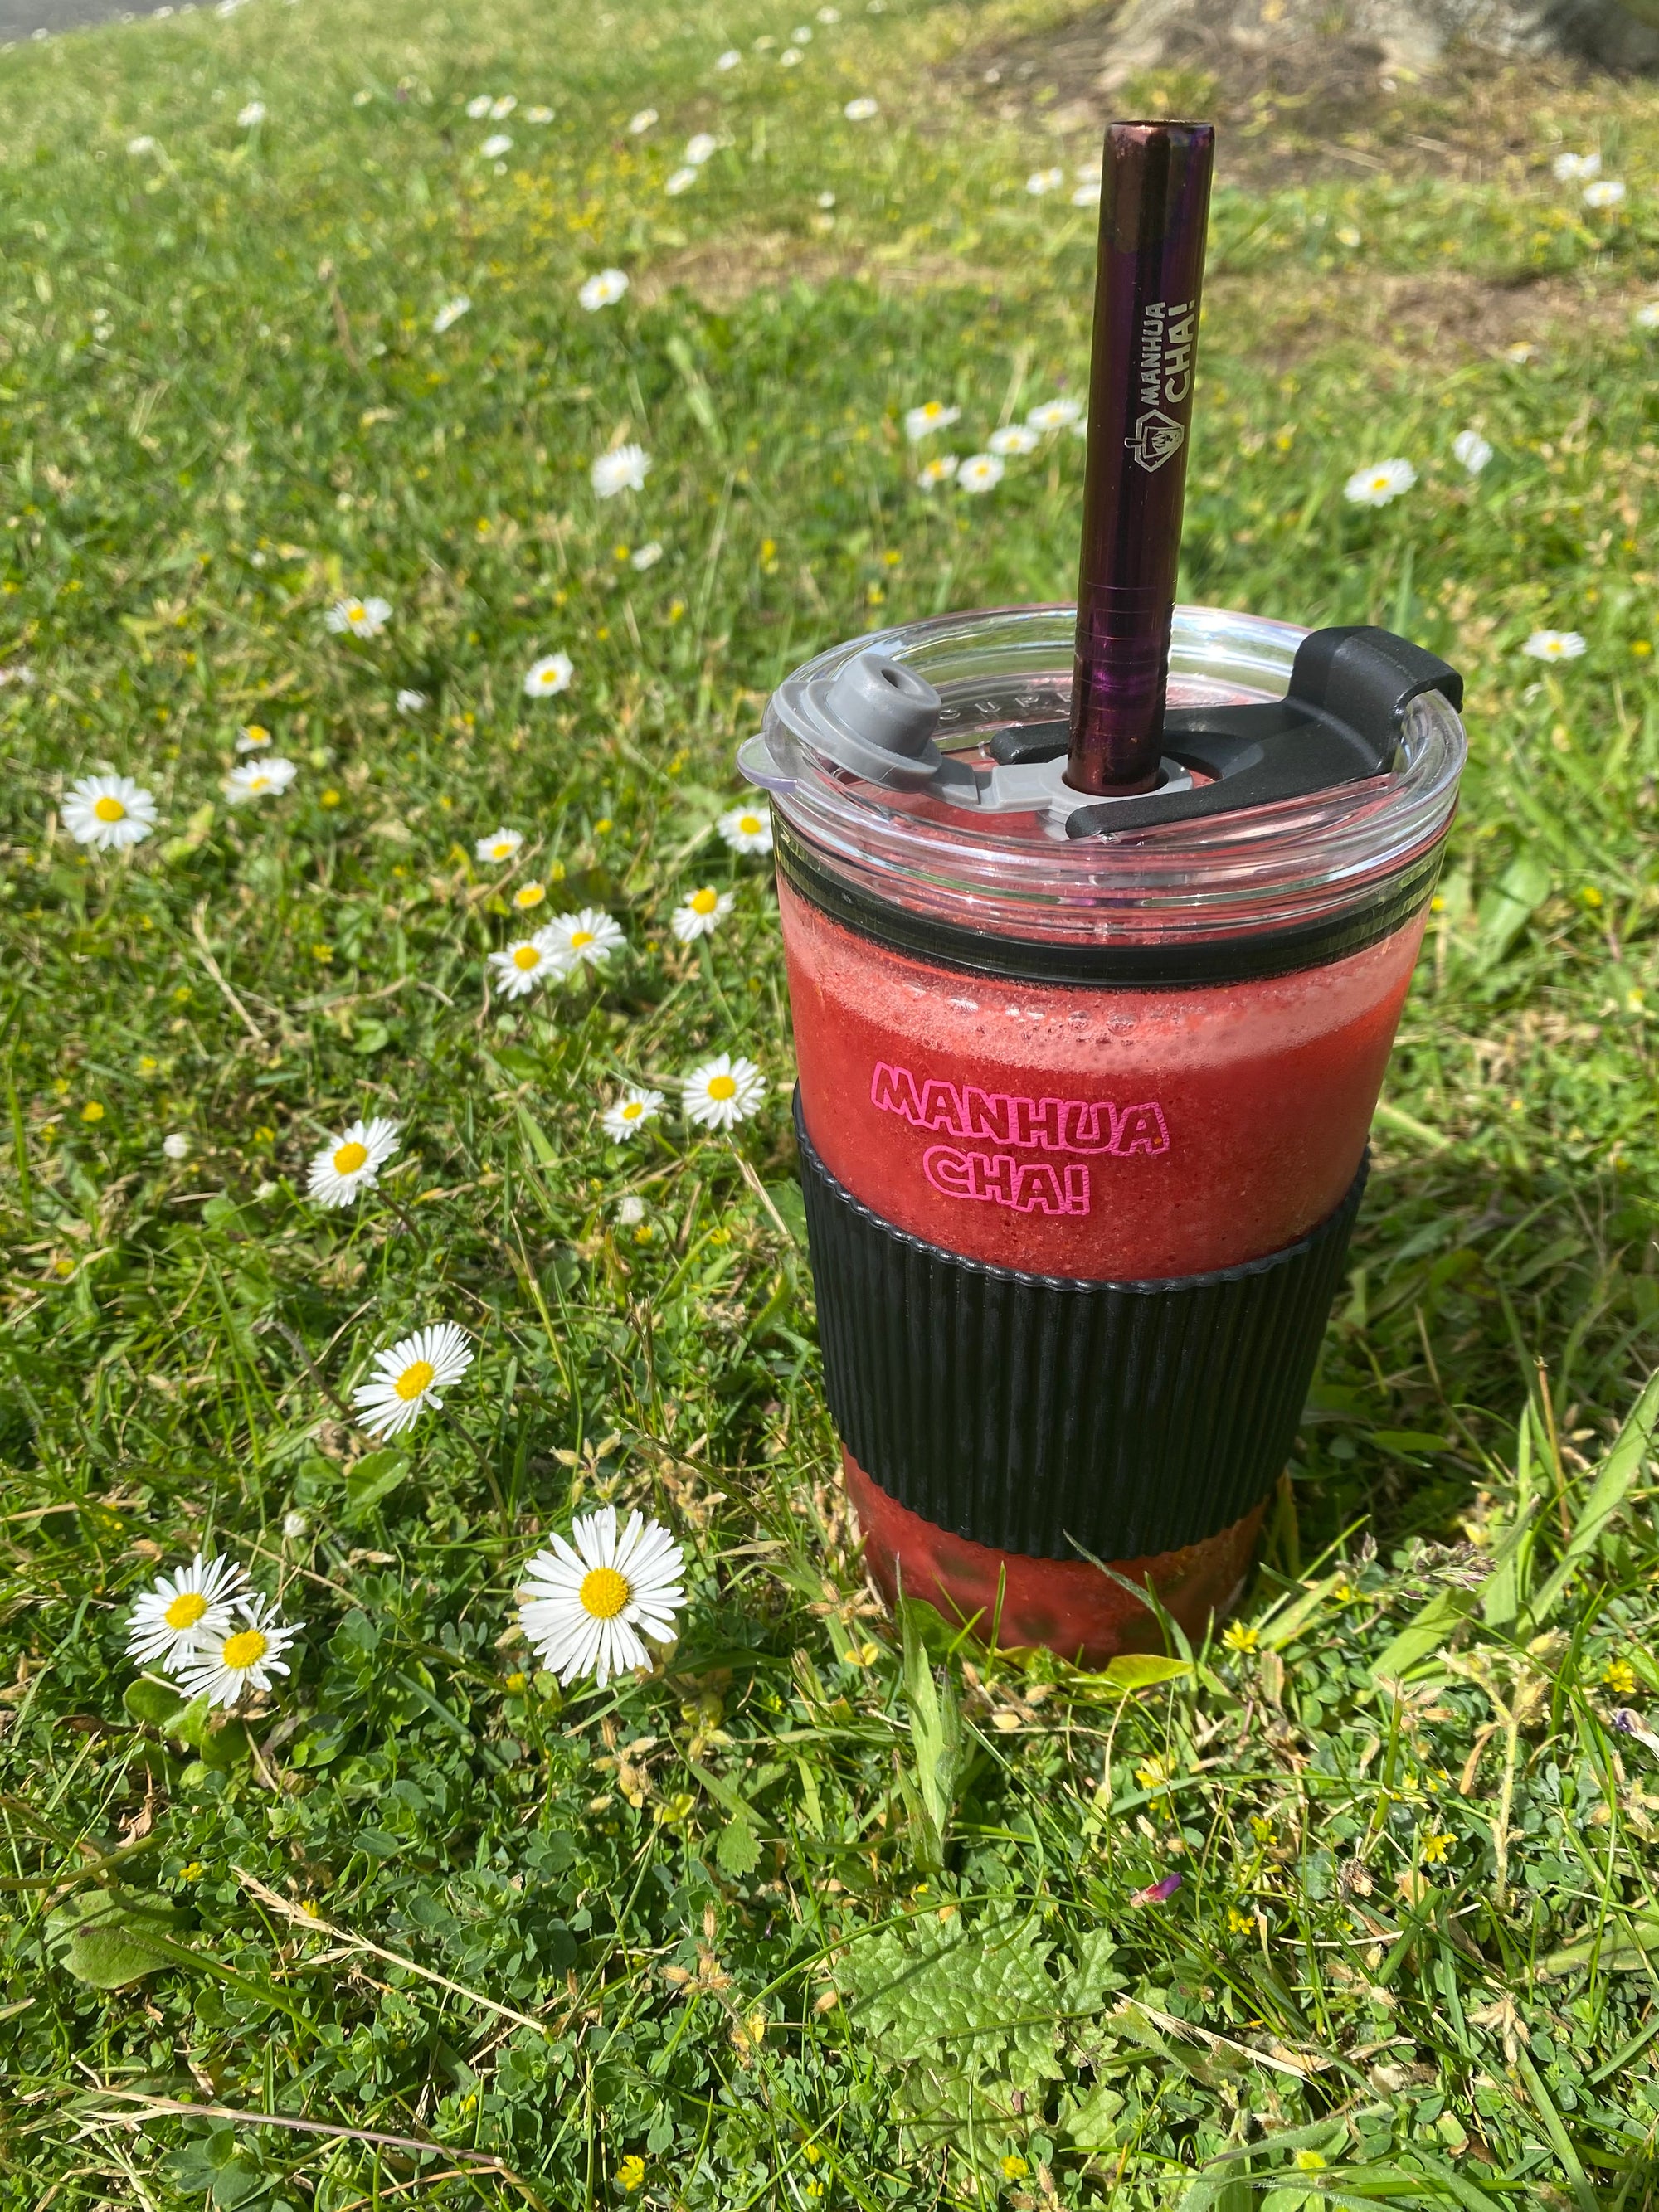 Bubble Tea Bliss: Sipping and Relaxing in the Park